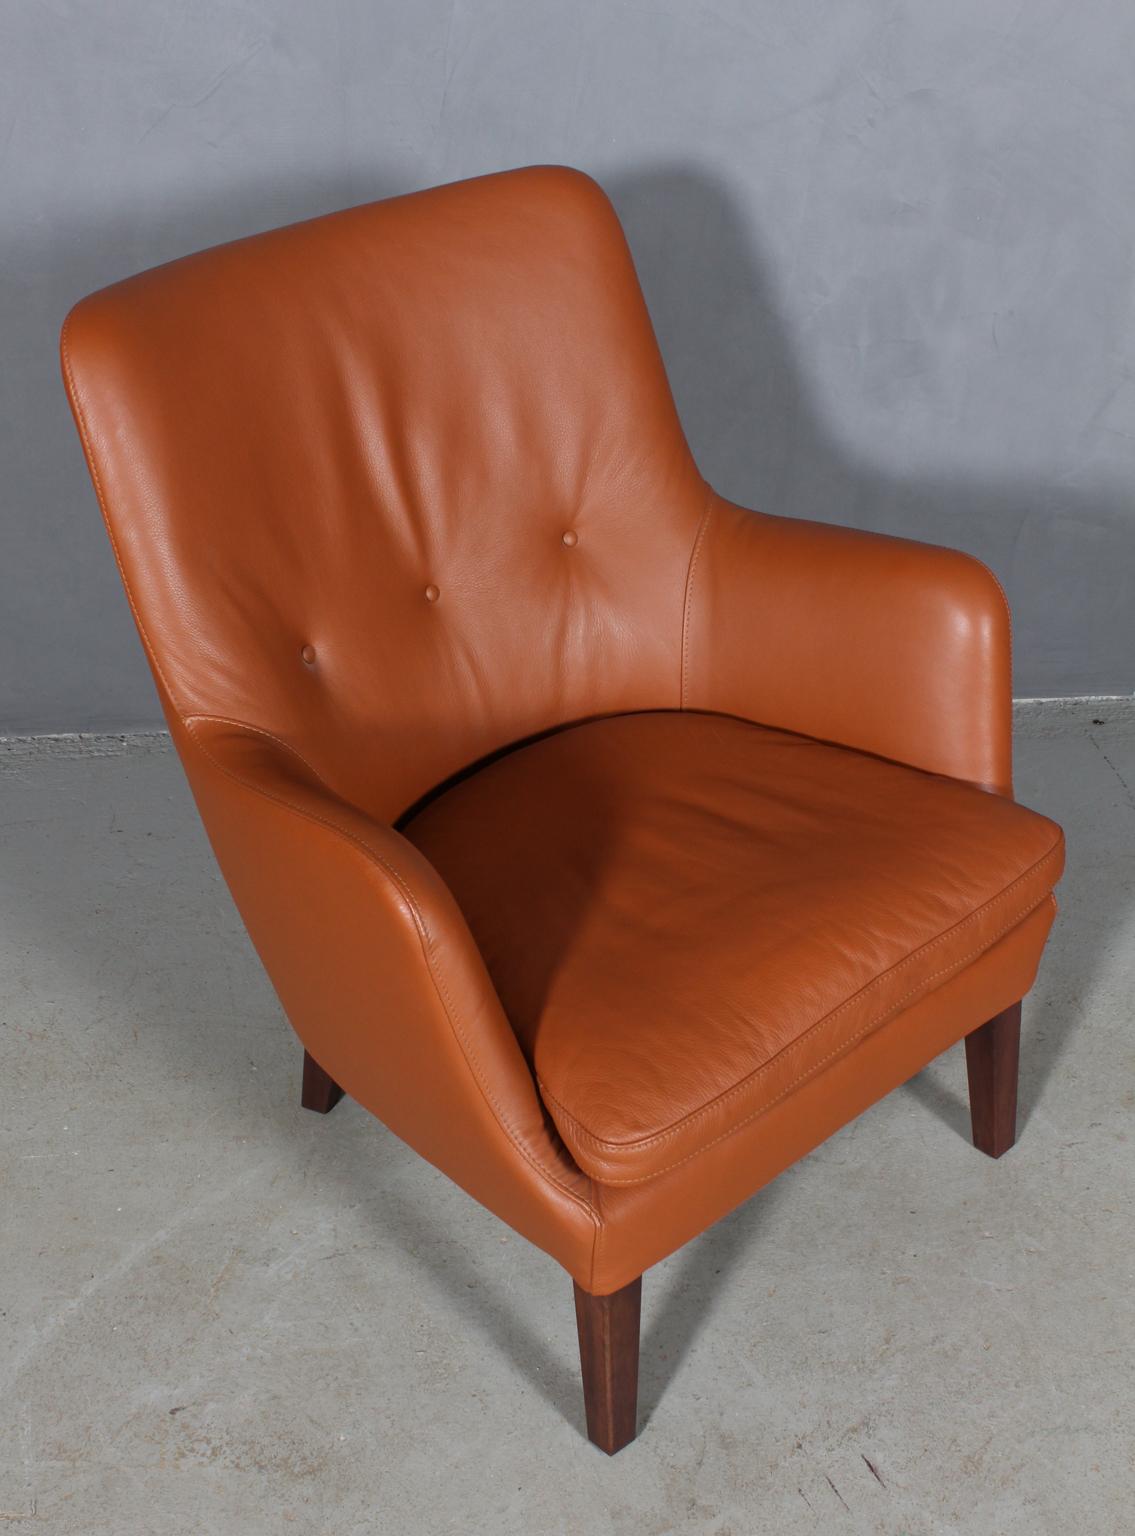 Arne Vodder lounge chair in original tan leather.

Legs of walnut. 

Model AV53, made by Nielaus.

Special order with same back as the model from Niels Vodder.